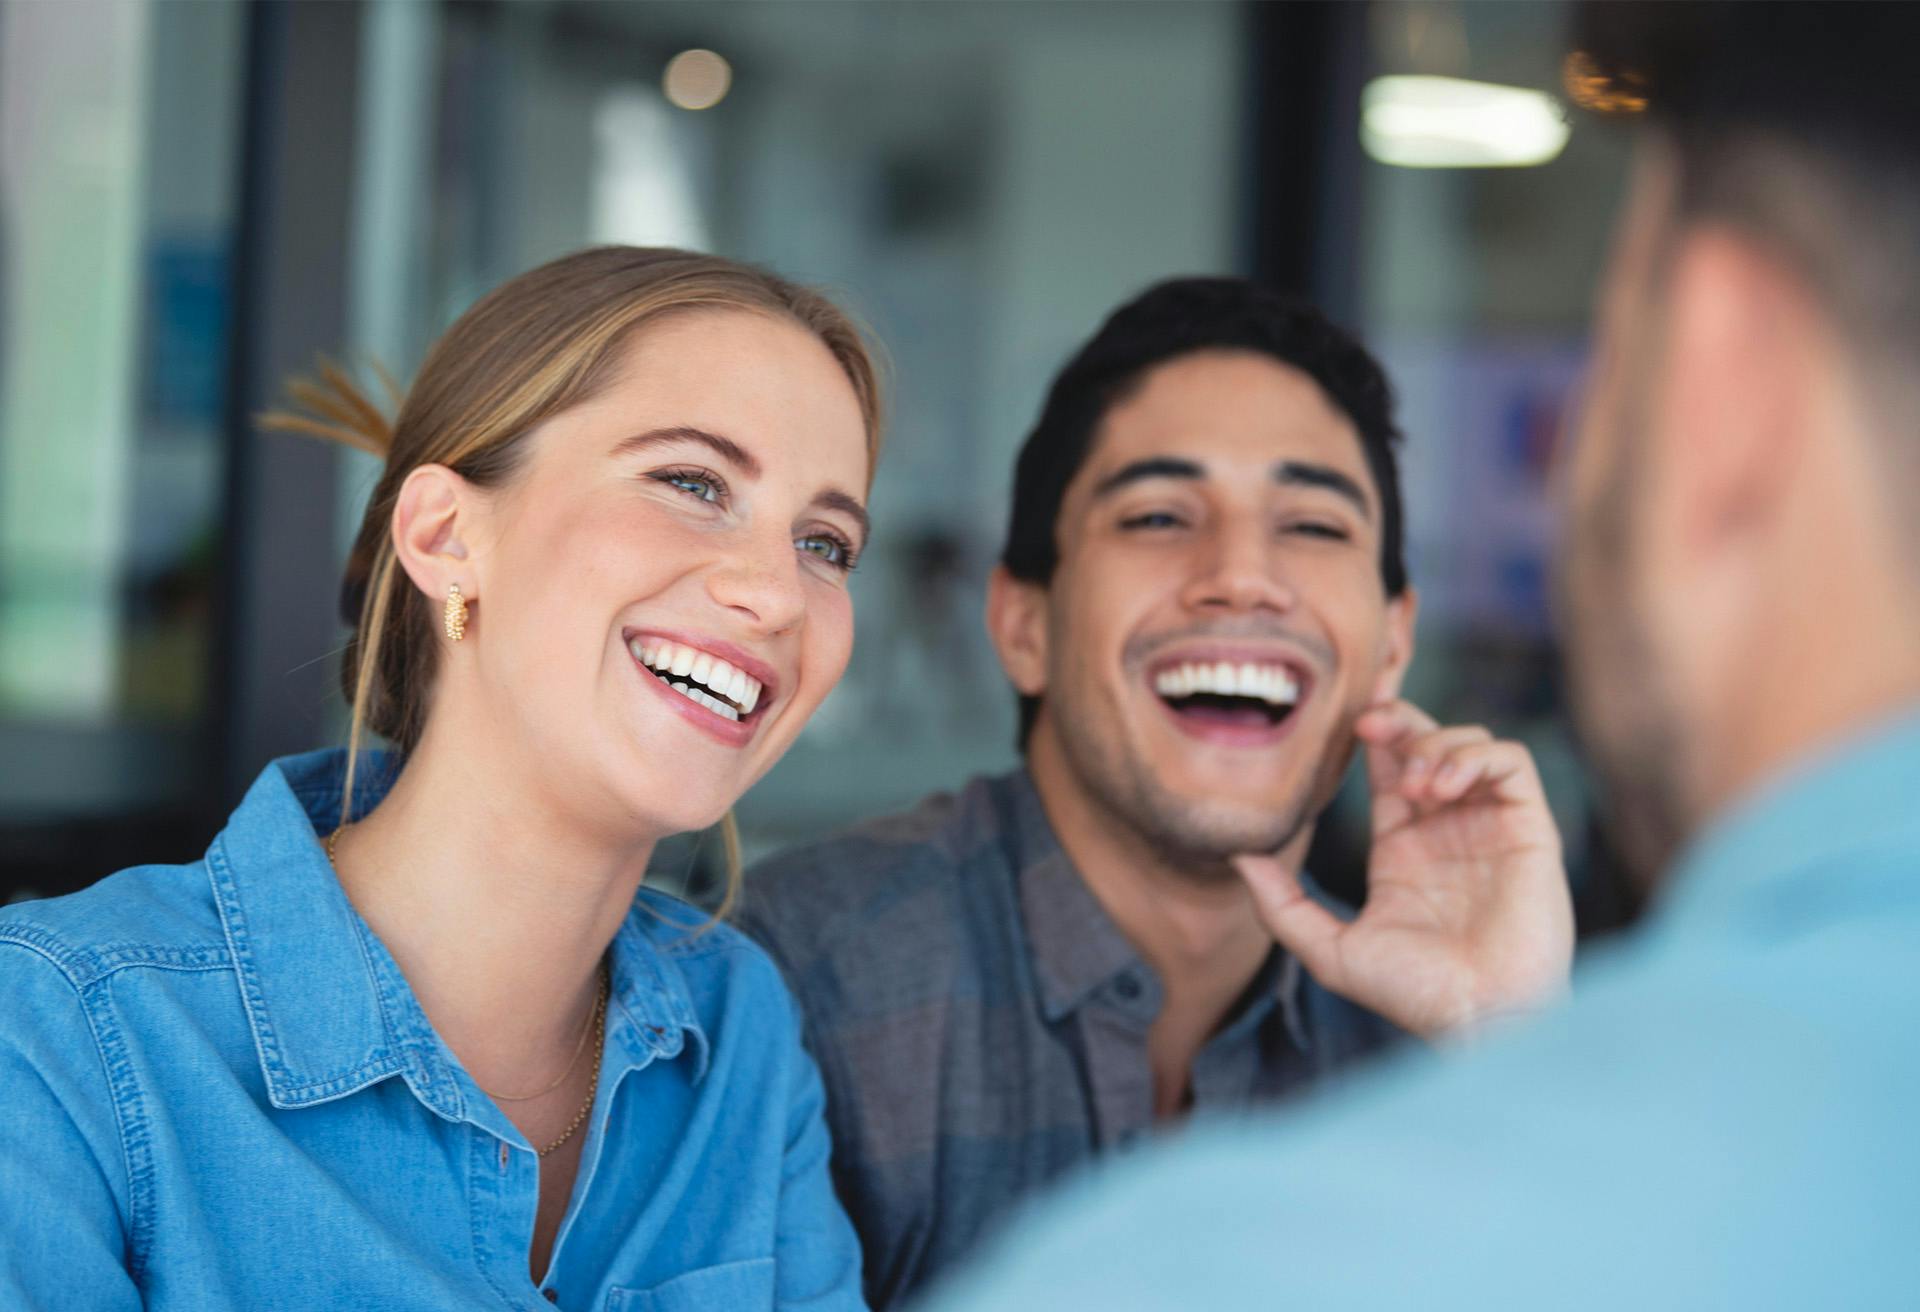 smiling woman talking on cell phone while man laughs with another man